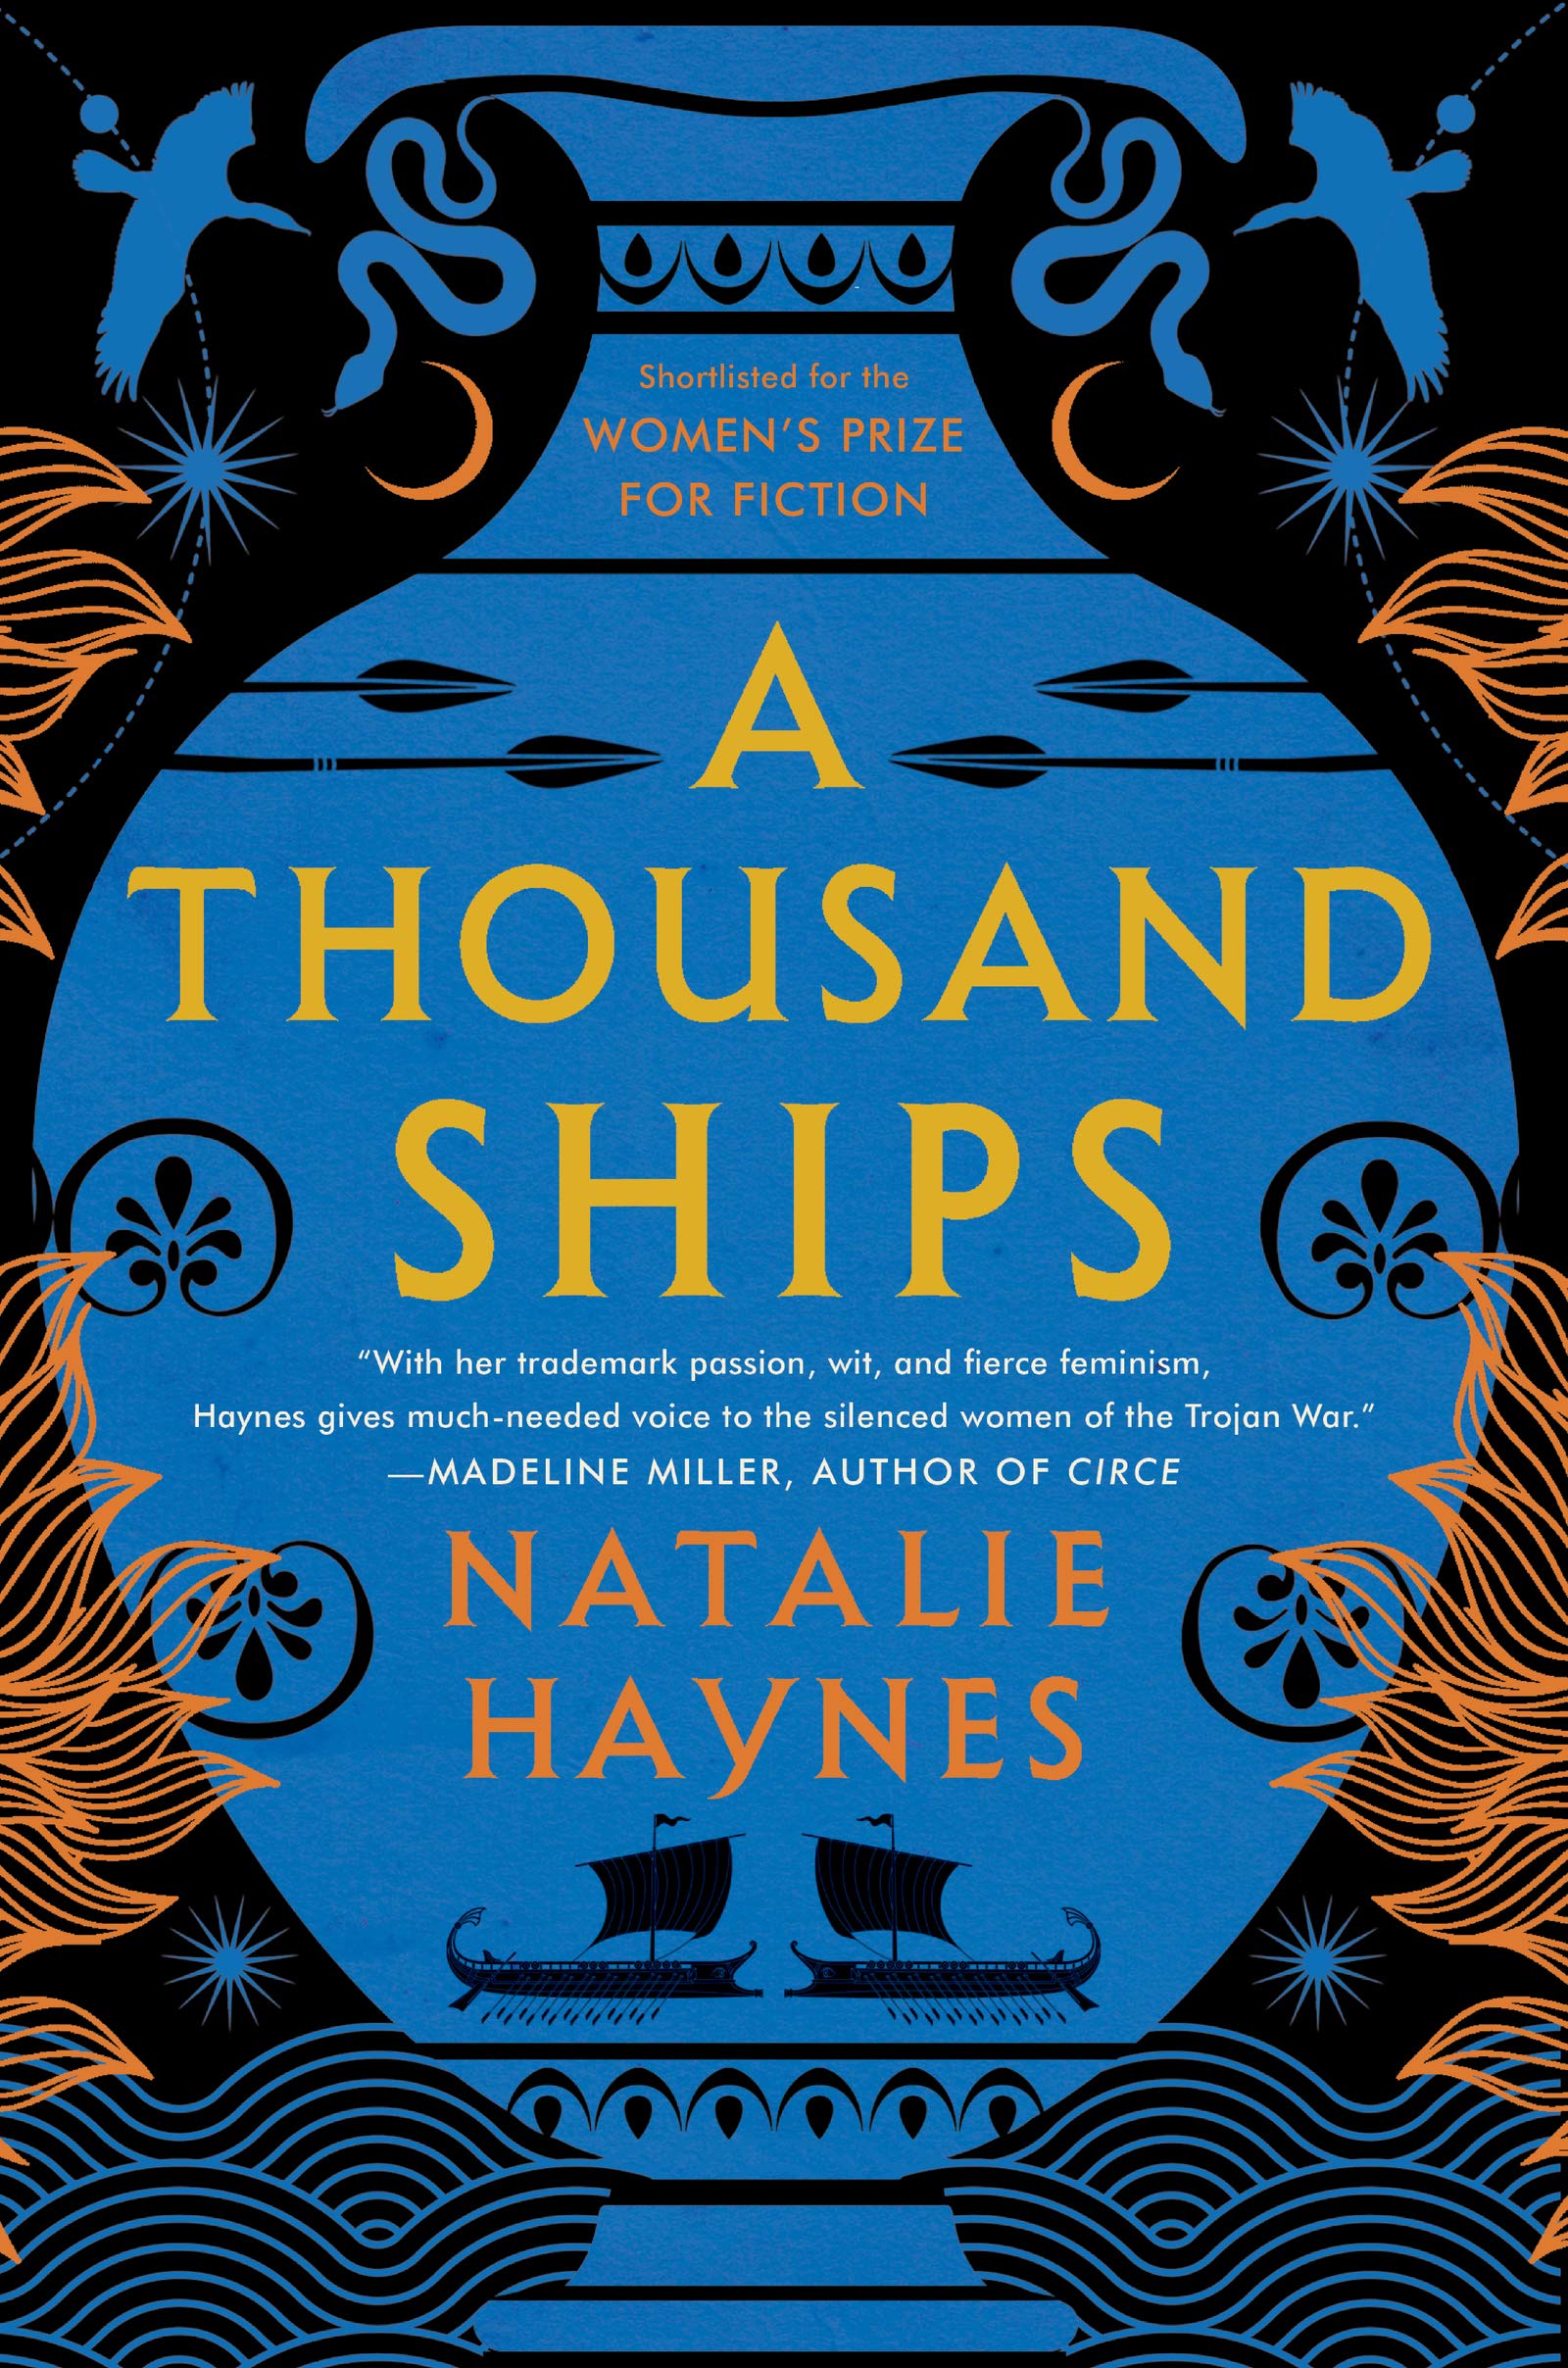 Cover for "A Thousand Ships" by Natalie Haynes